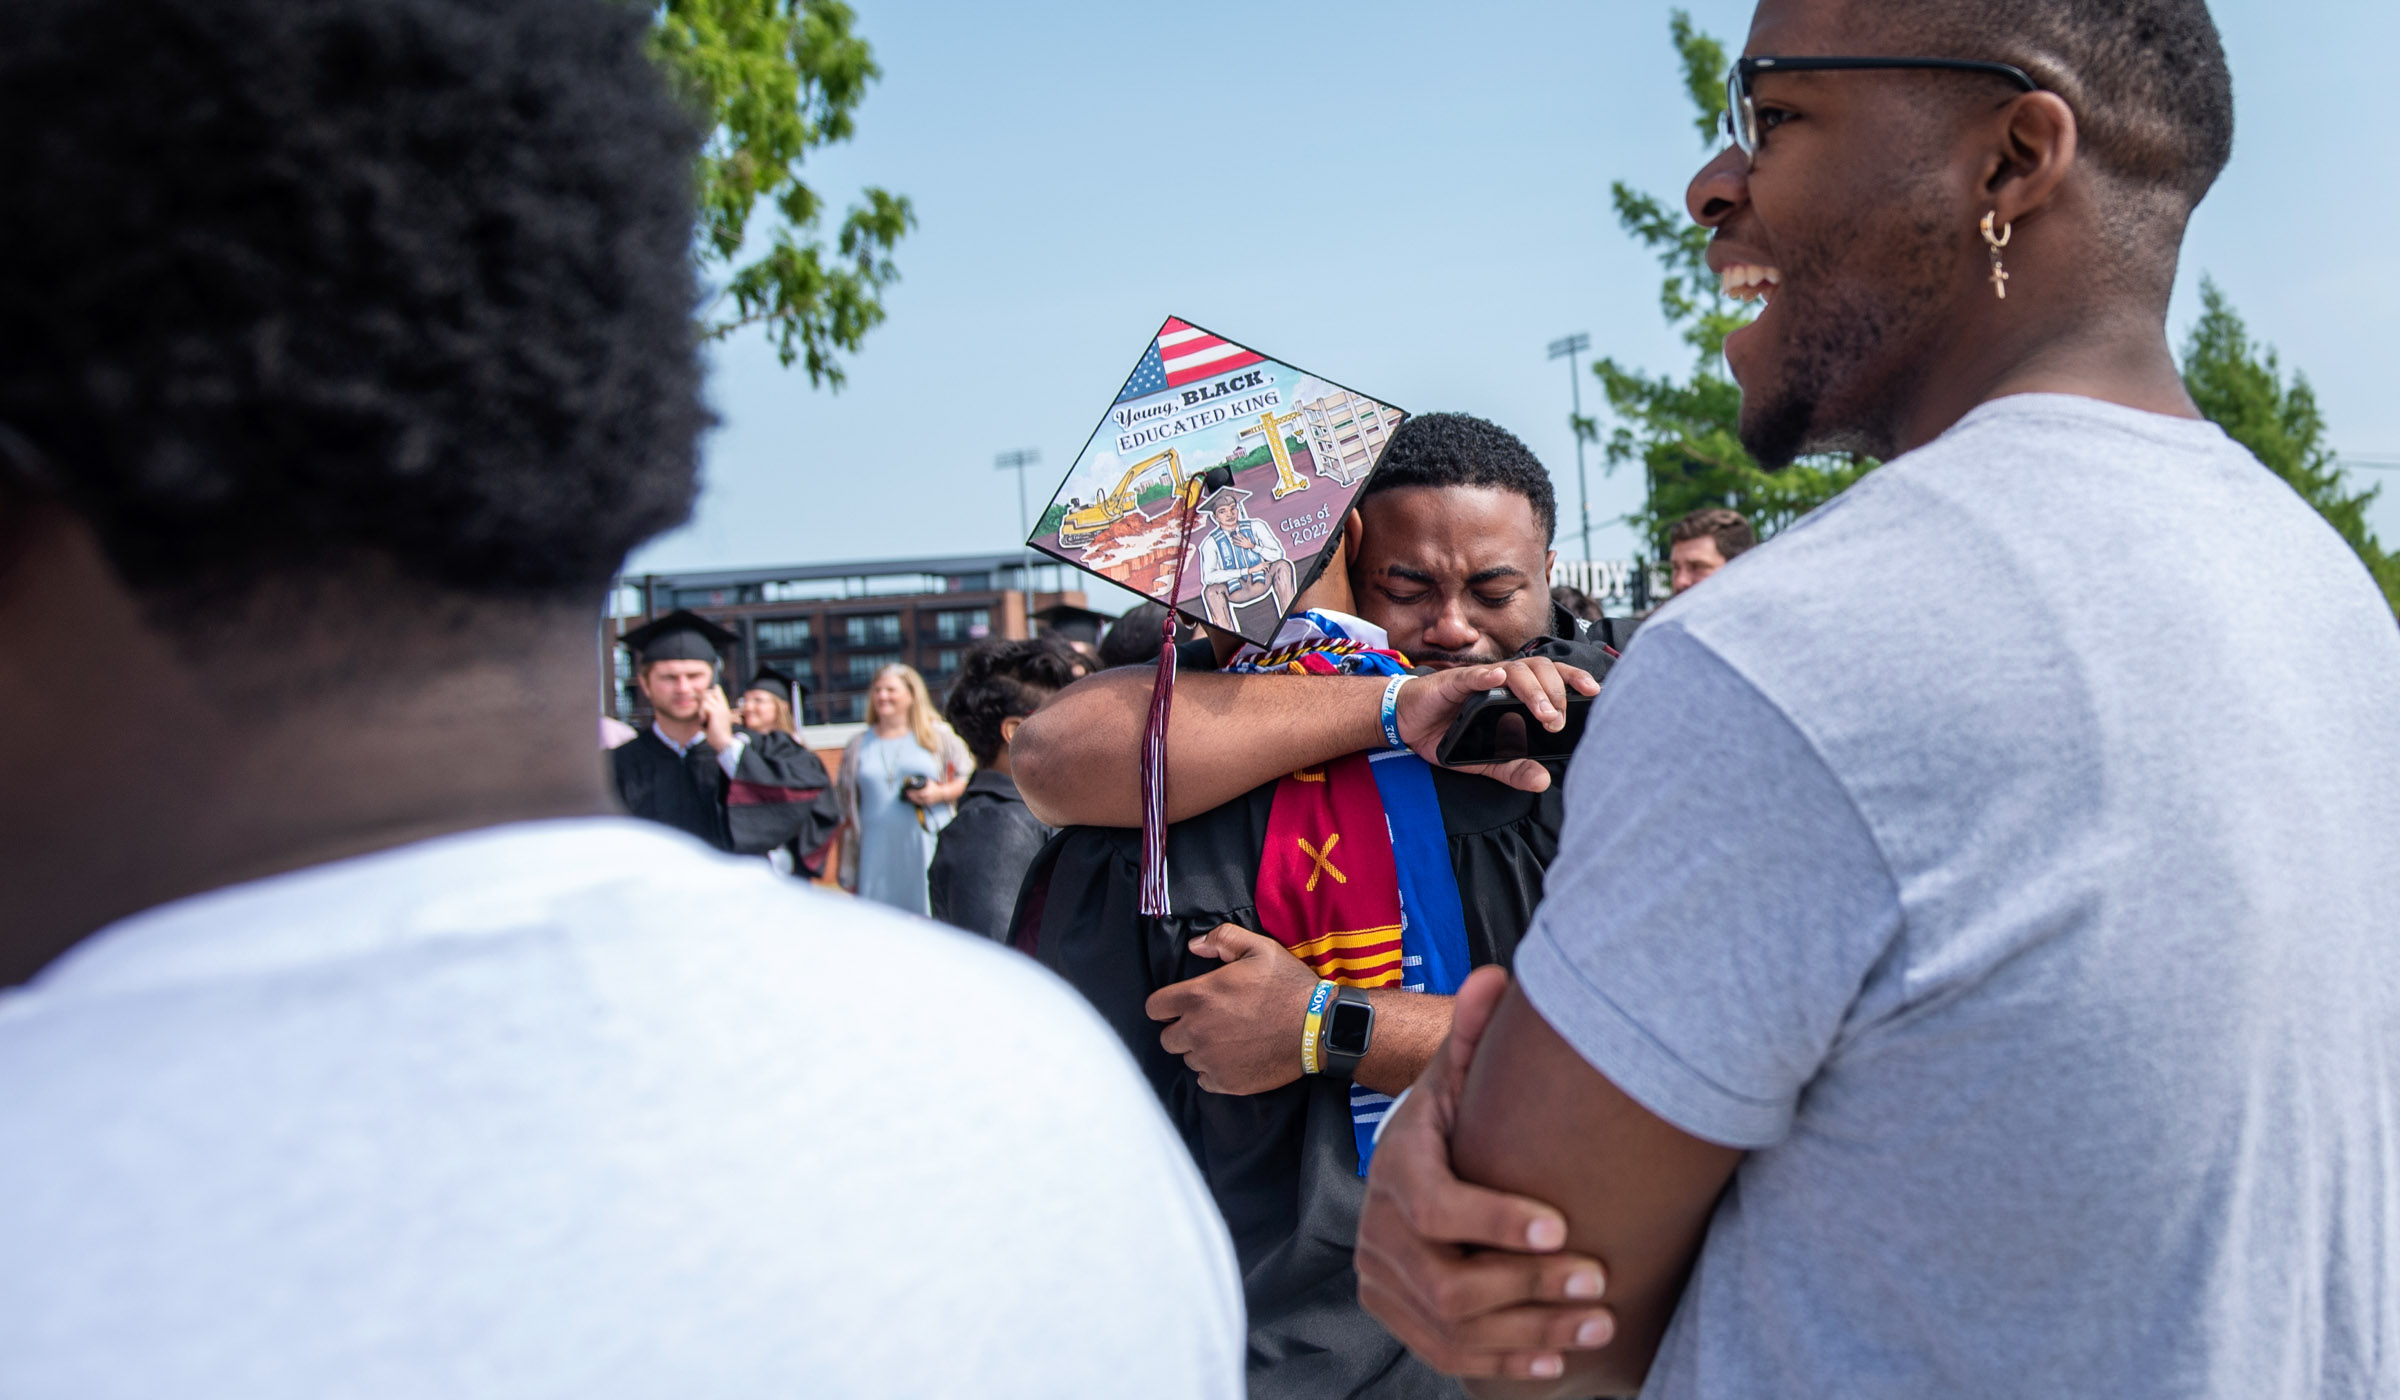 Framed by the shoulders of fellow graduation guests, one student hugs a graduate whose back is turned to the camera, displaying the decorated mortar board he&#039;s wearing.